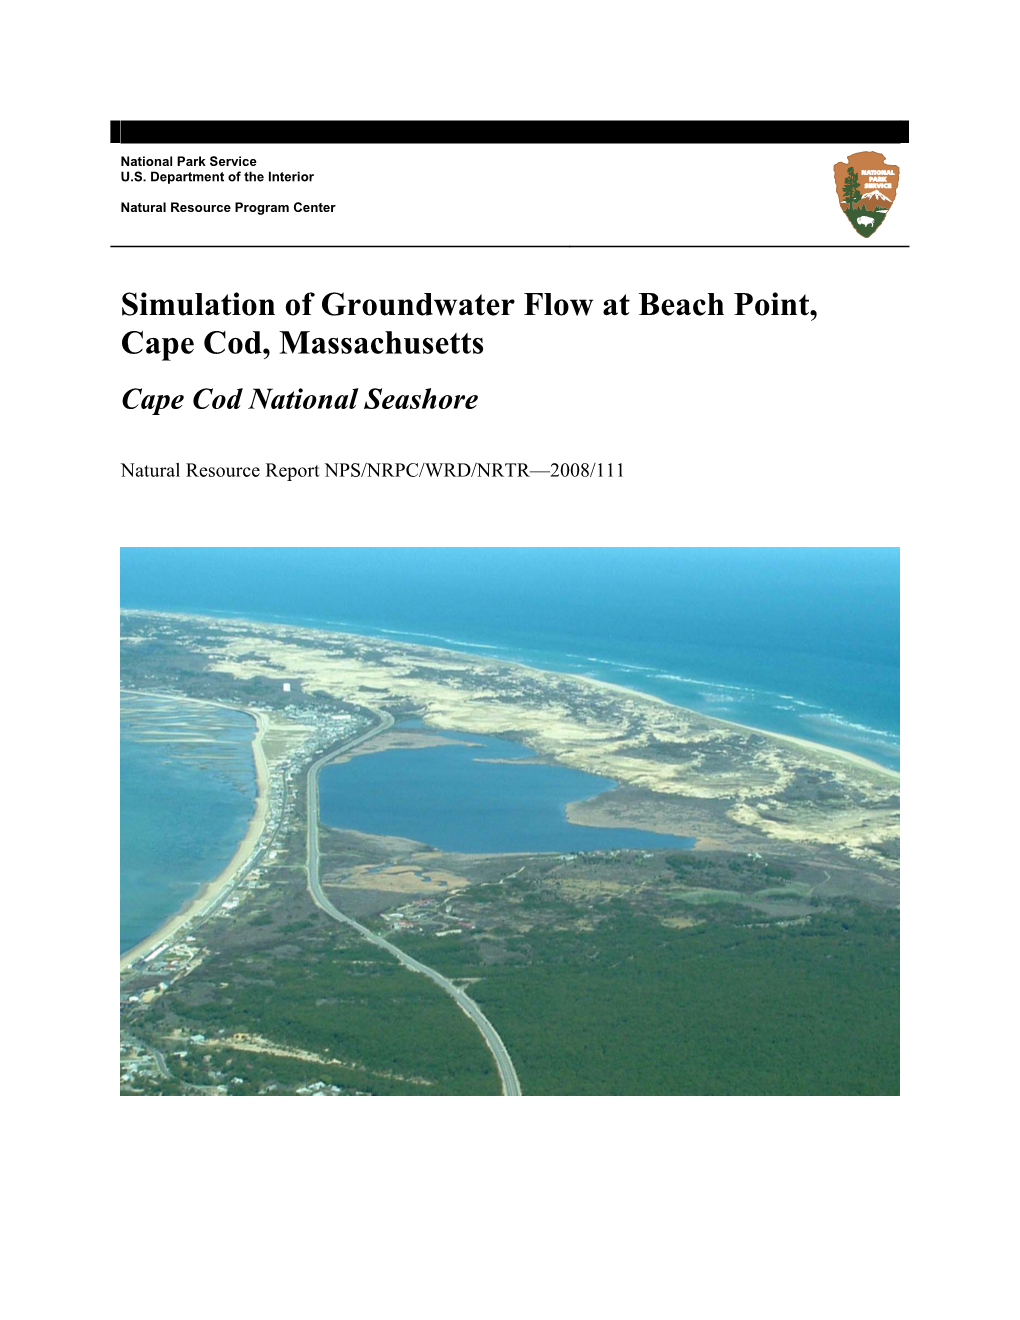 Simulation of Groundwater Flow at Beach Point, Cape Cod, Massachusetts Cape Cod National Seashore